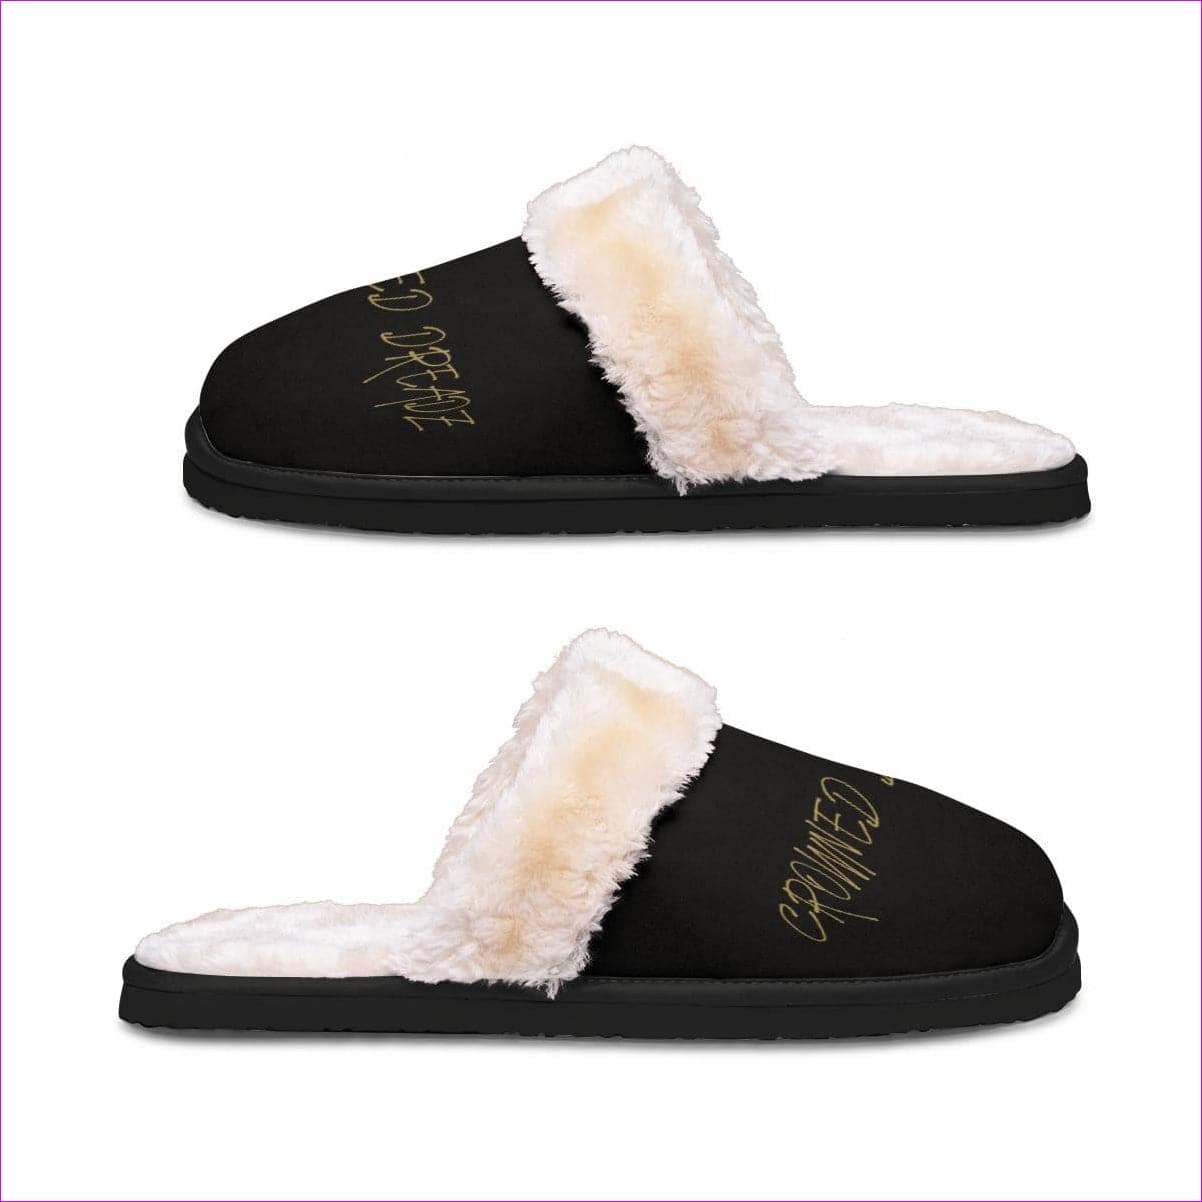 black Men's Crowned dreadz Home Plush Slippers - men's slippers at TFC&H Co.